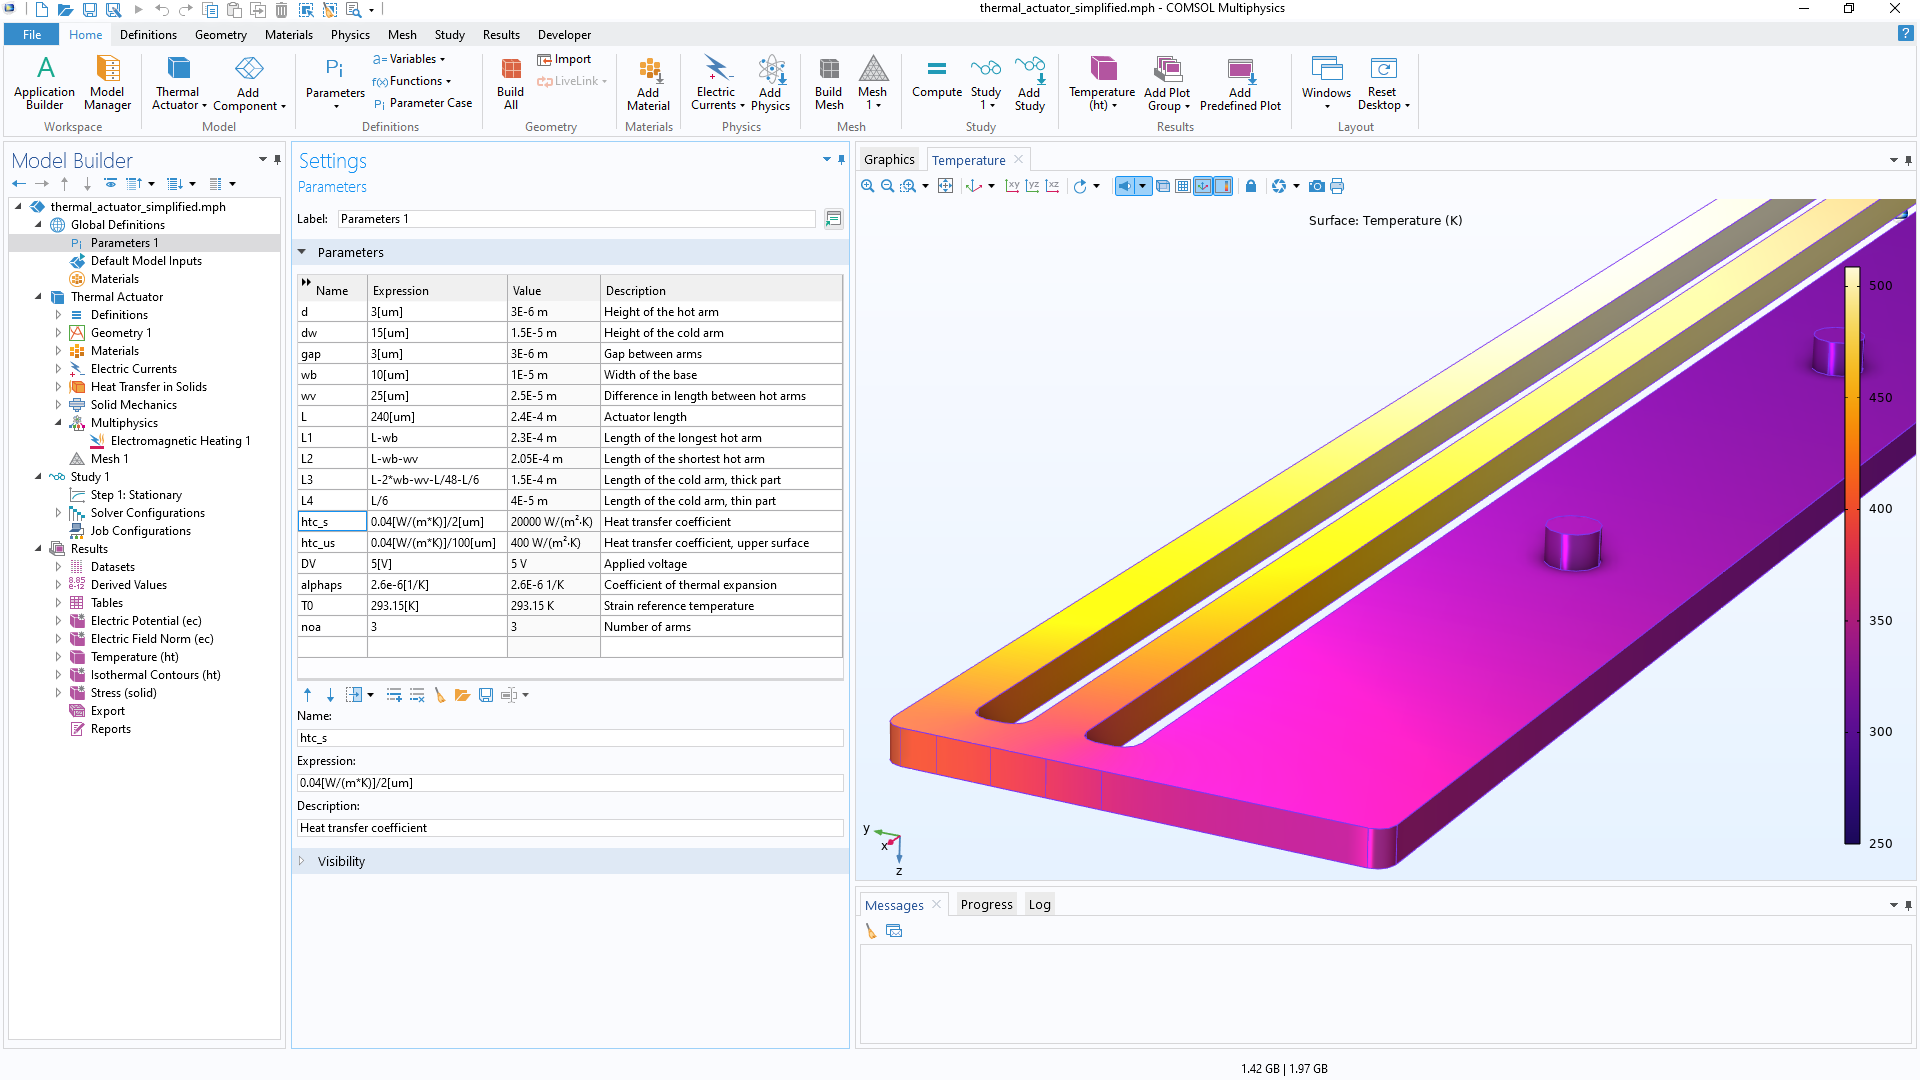 A screenshot of a model that has been made parametric in COMSOL Multiphysics.